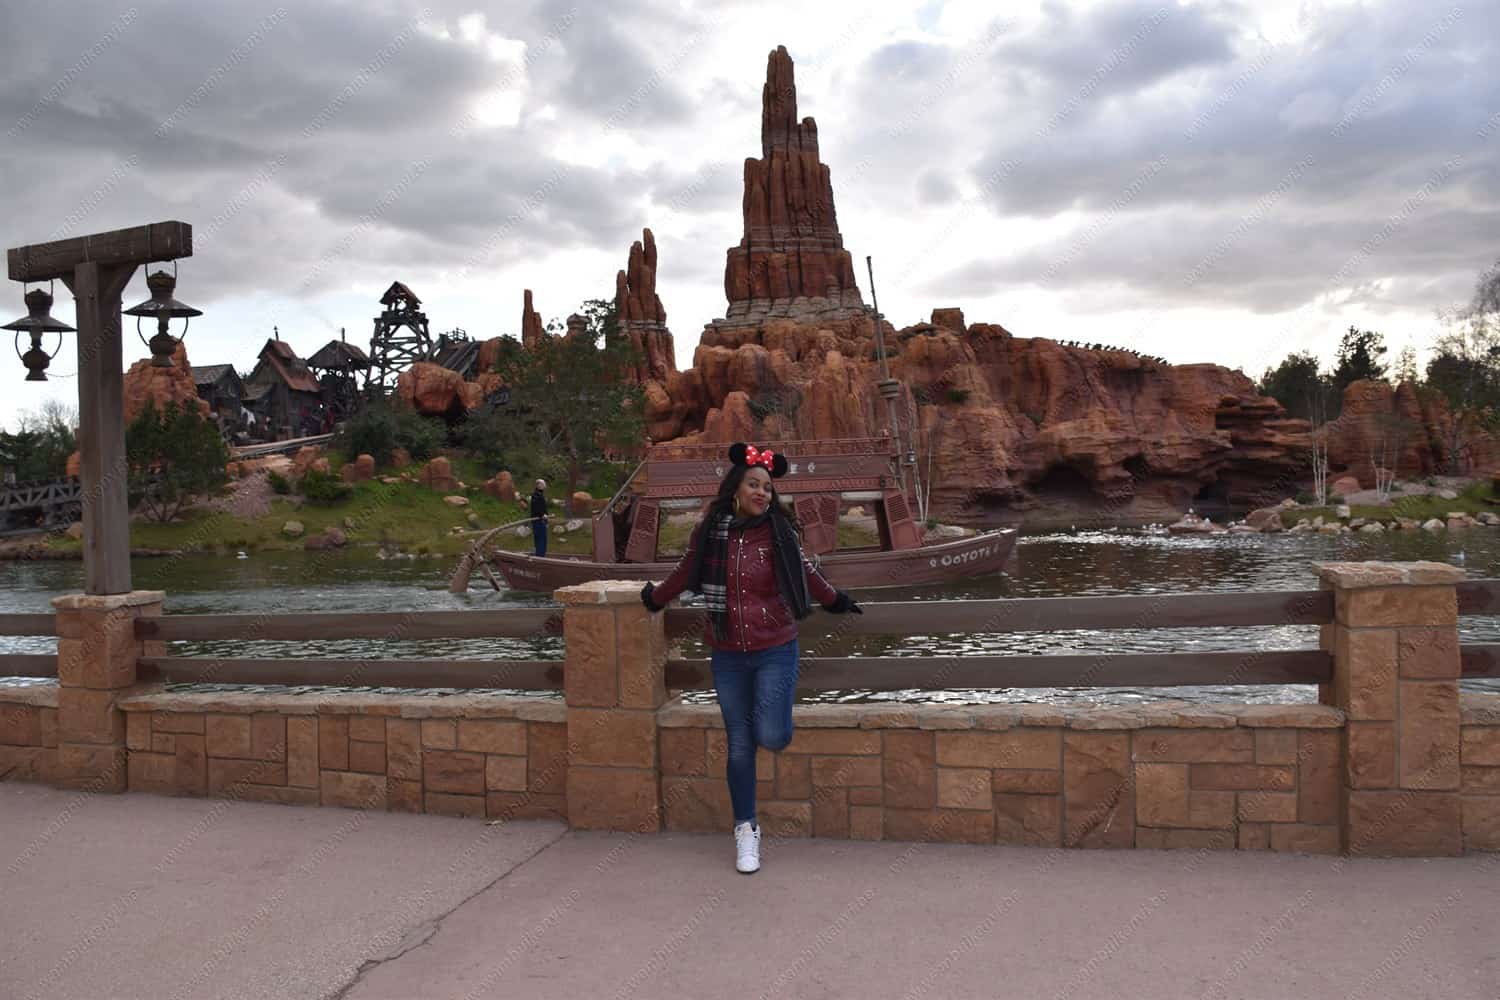 You are currently viewing The Frontierland in Disneyland Paris